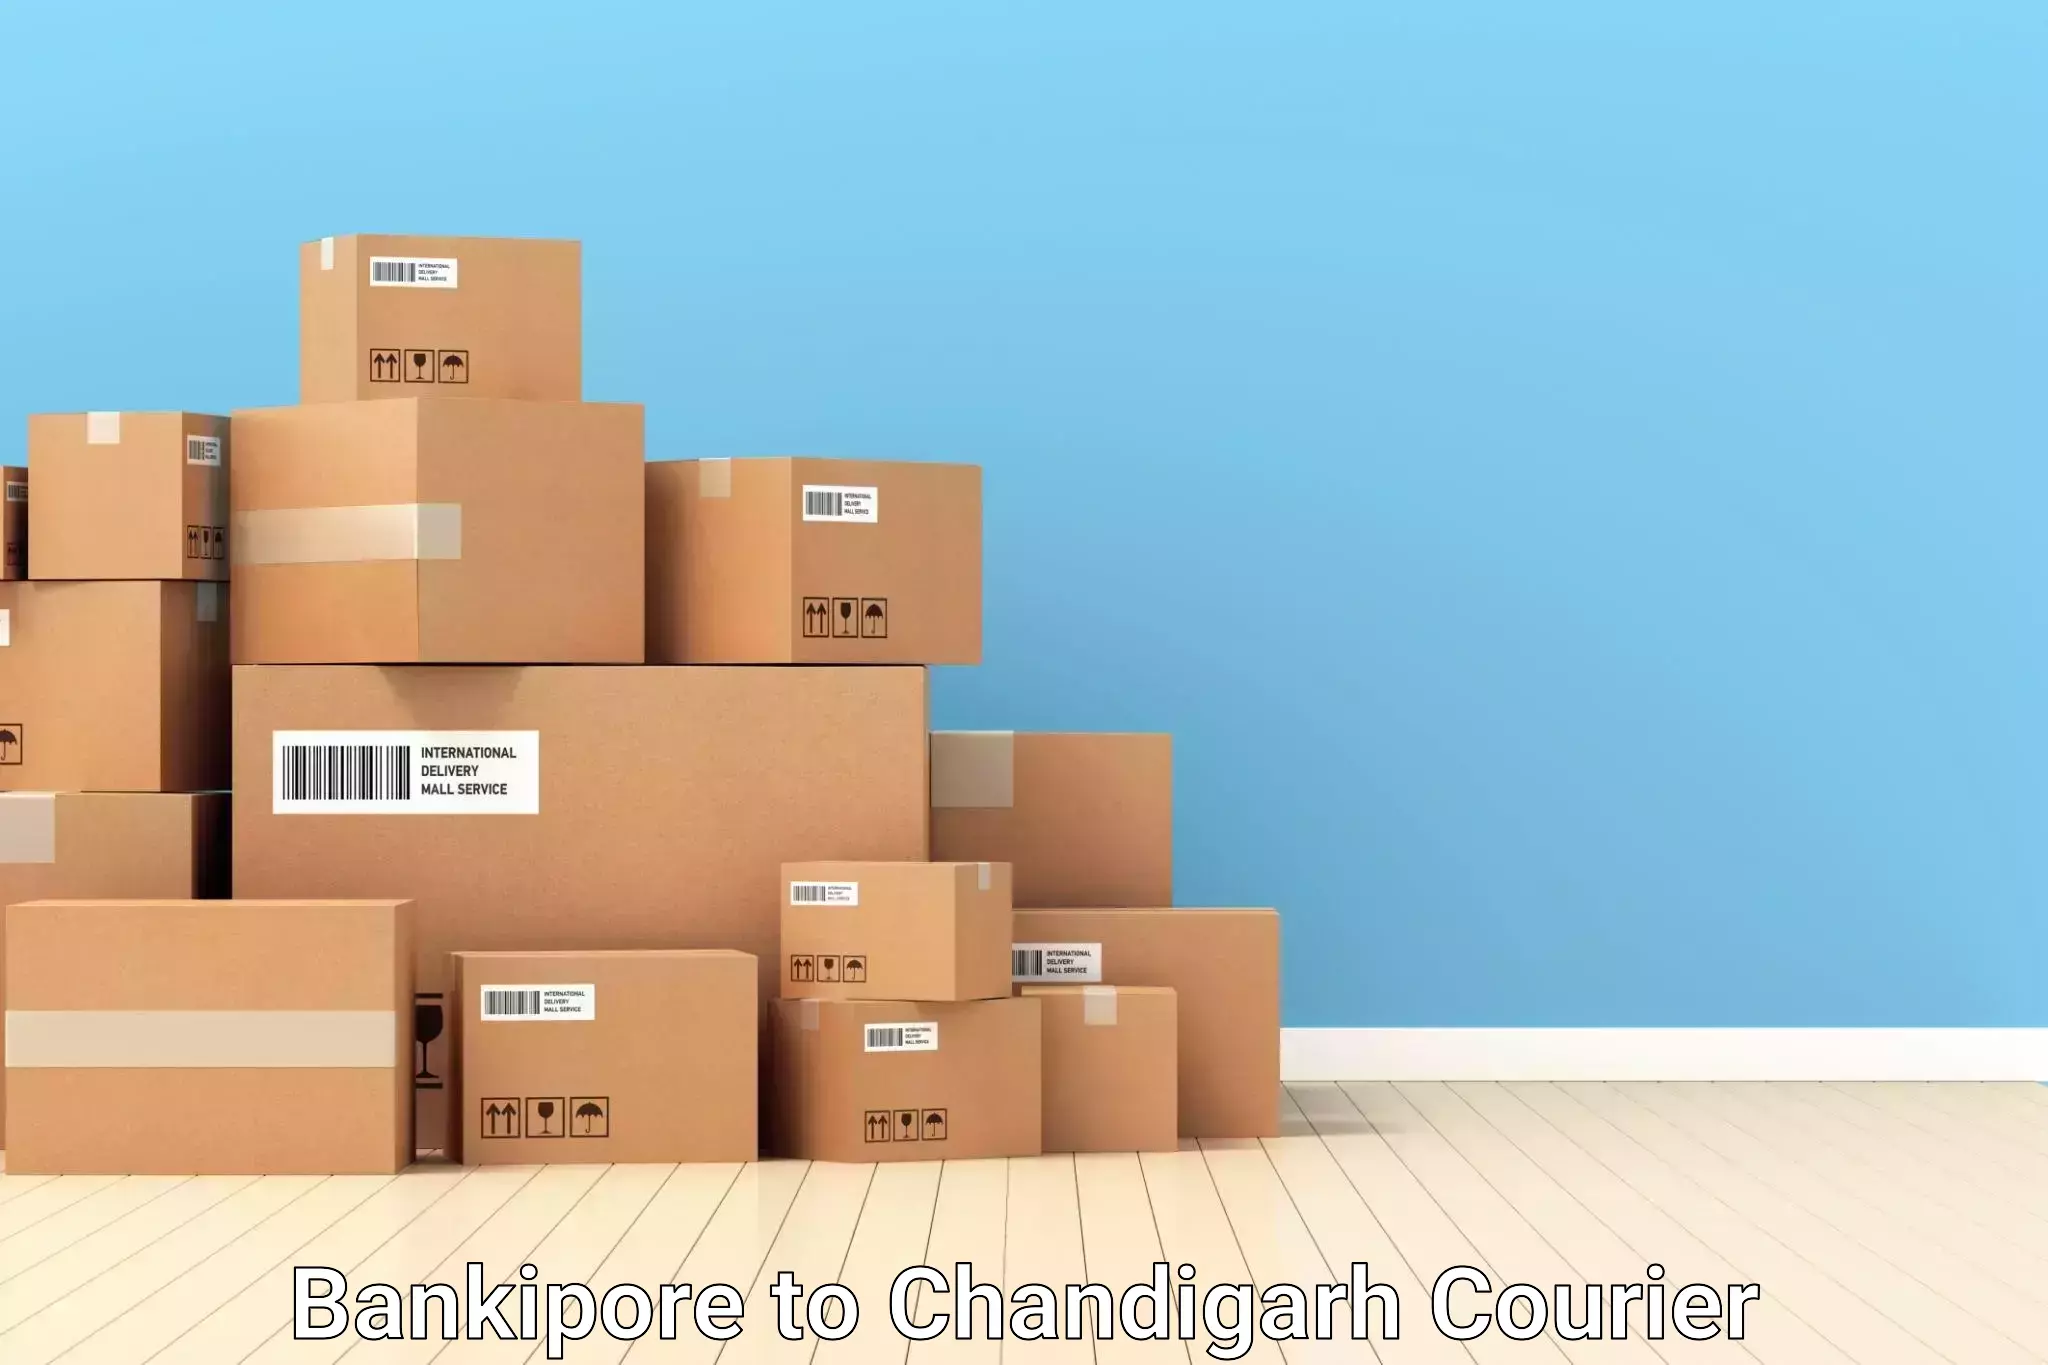 Luggage delivery providers Bankipore to Chandigarh